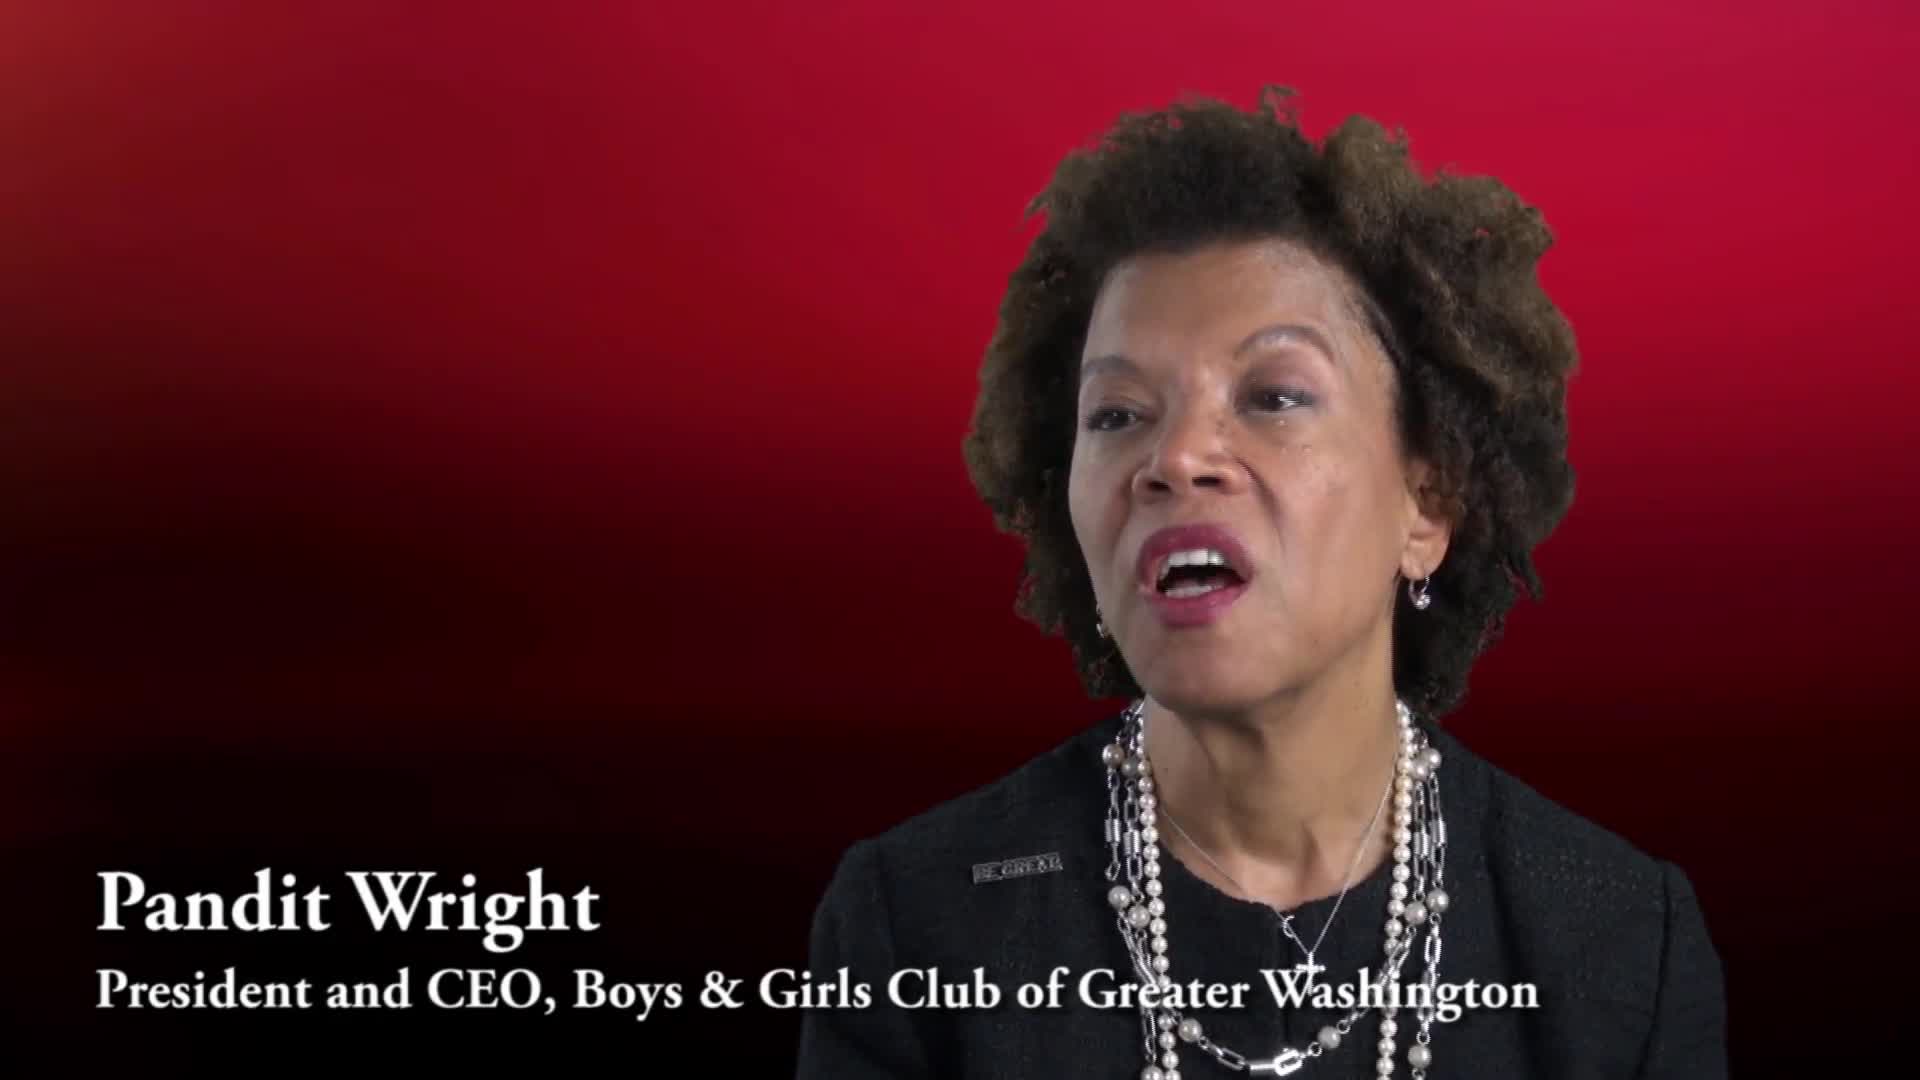 Women Who Mean Business 2014 preview: Pandit Wright of the Boys and Girls Club of Greater Washington on not being a quitter (Video)